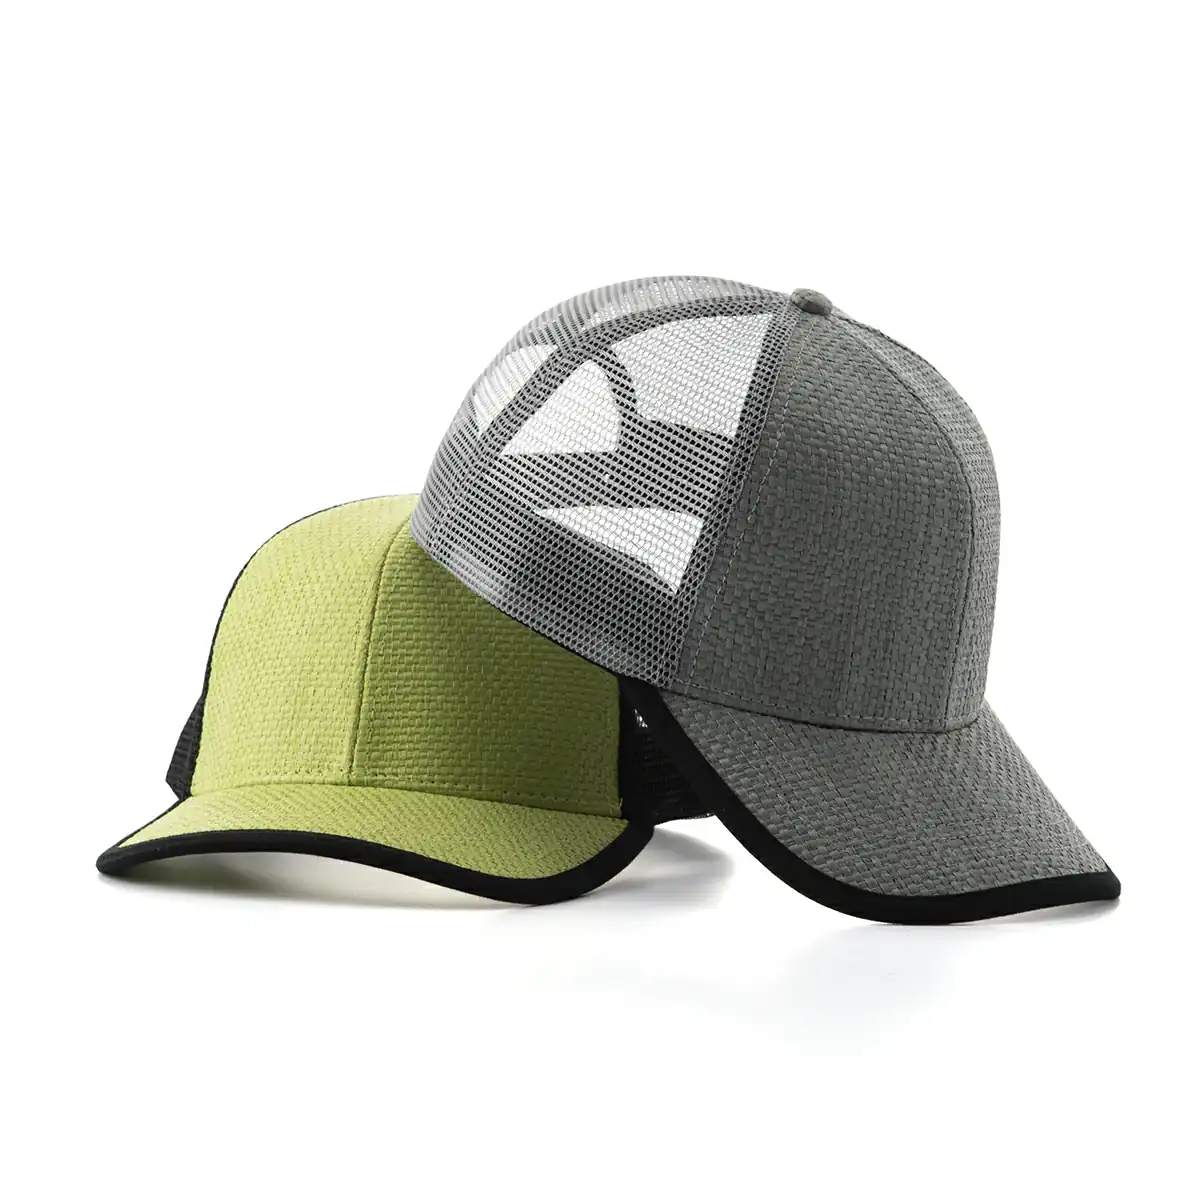 Aung Crown unisex patchwork trucker hat trendy in green or gray SFG-210428-5